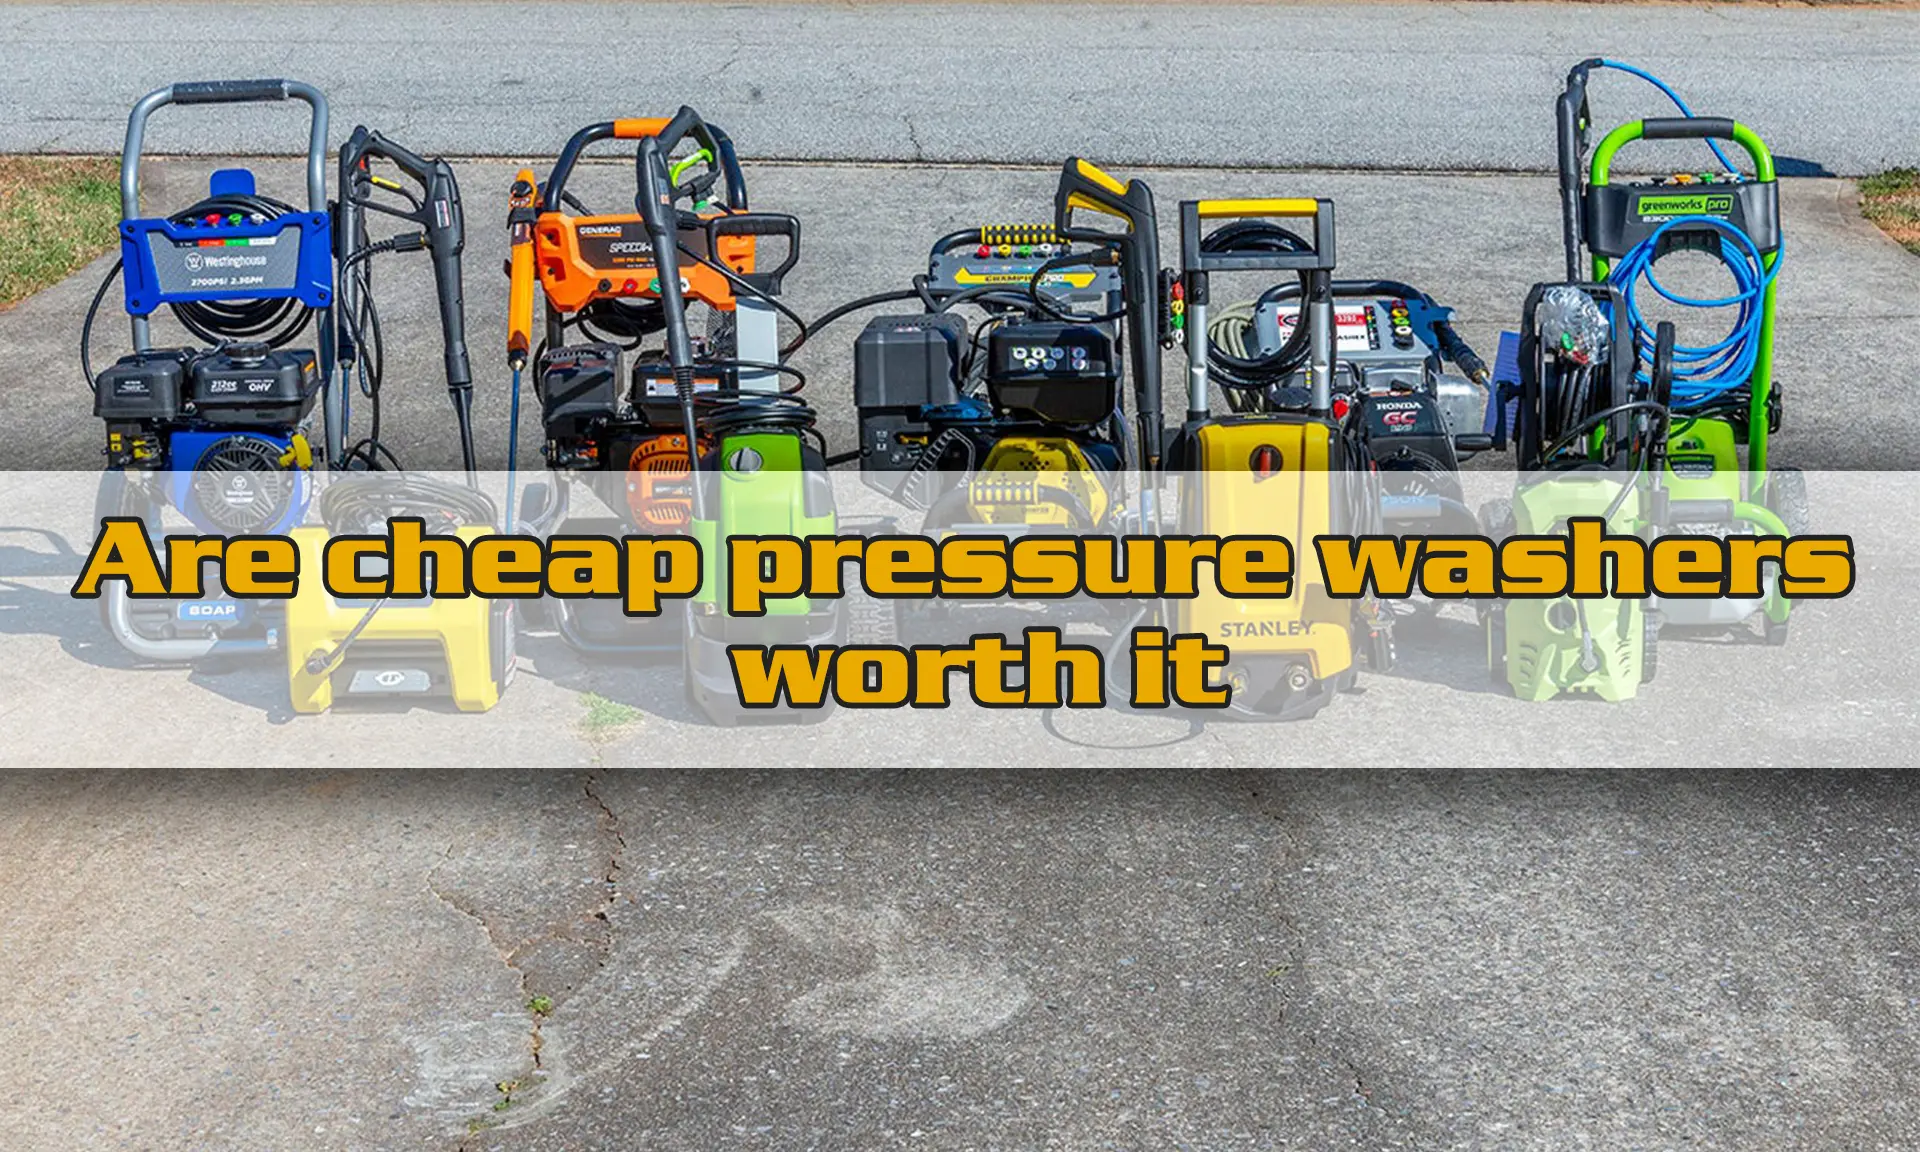 Are cheap pressure washers worth it